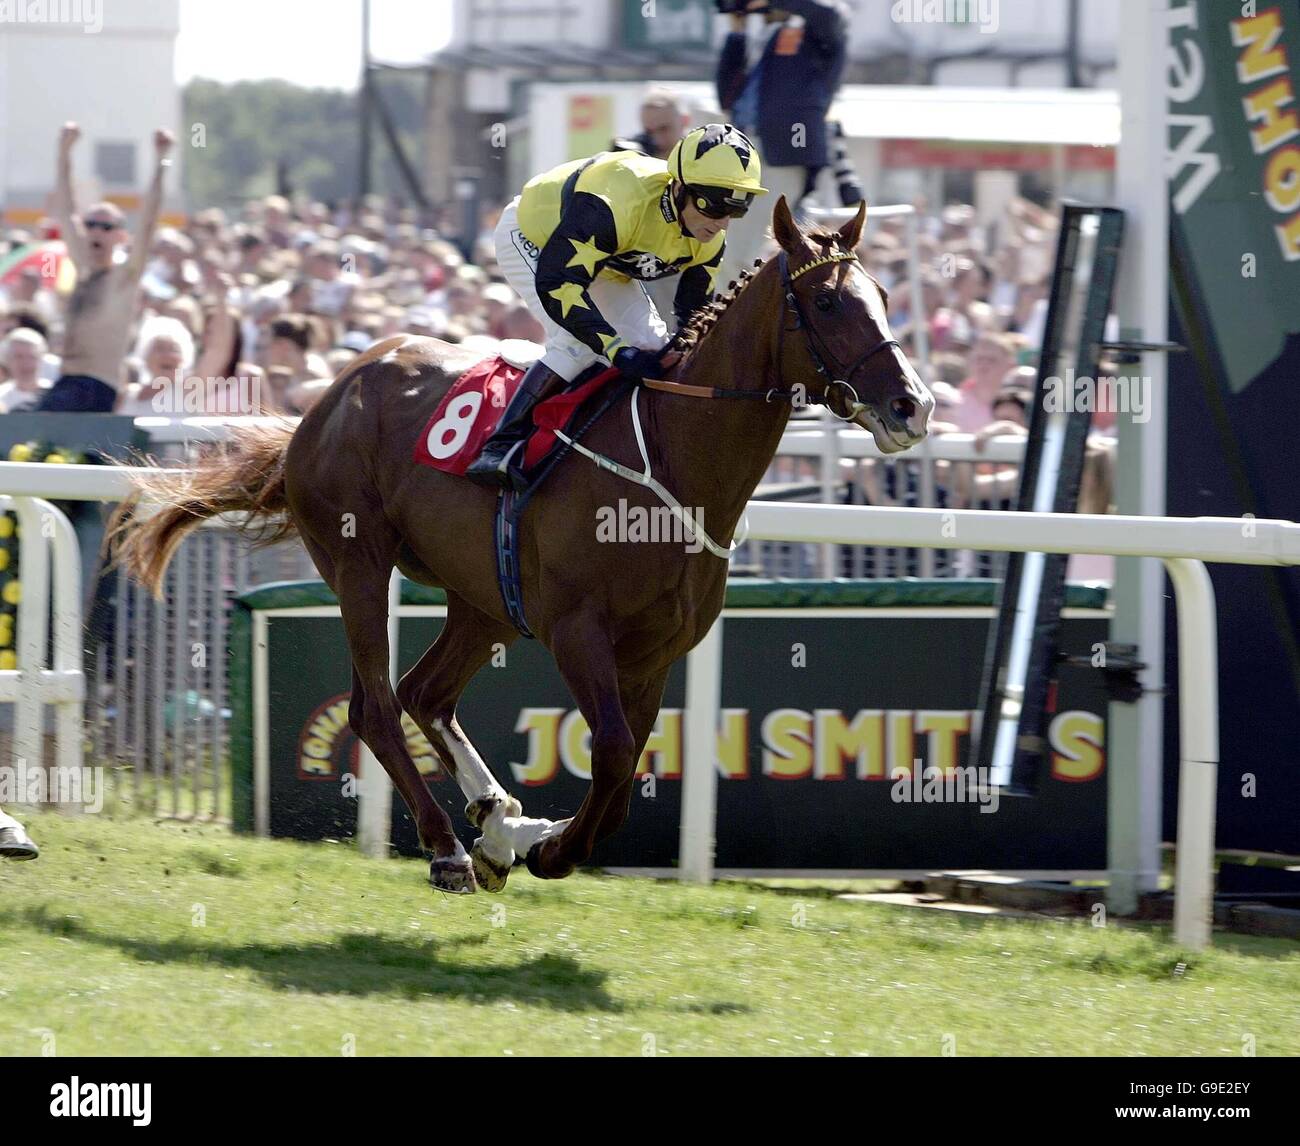 Linas Selection, ridden by Kevin Darley goes on to win the John Smith's Extra Smooth Silver Cup Handicap at York Racecourse. Stock Photo